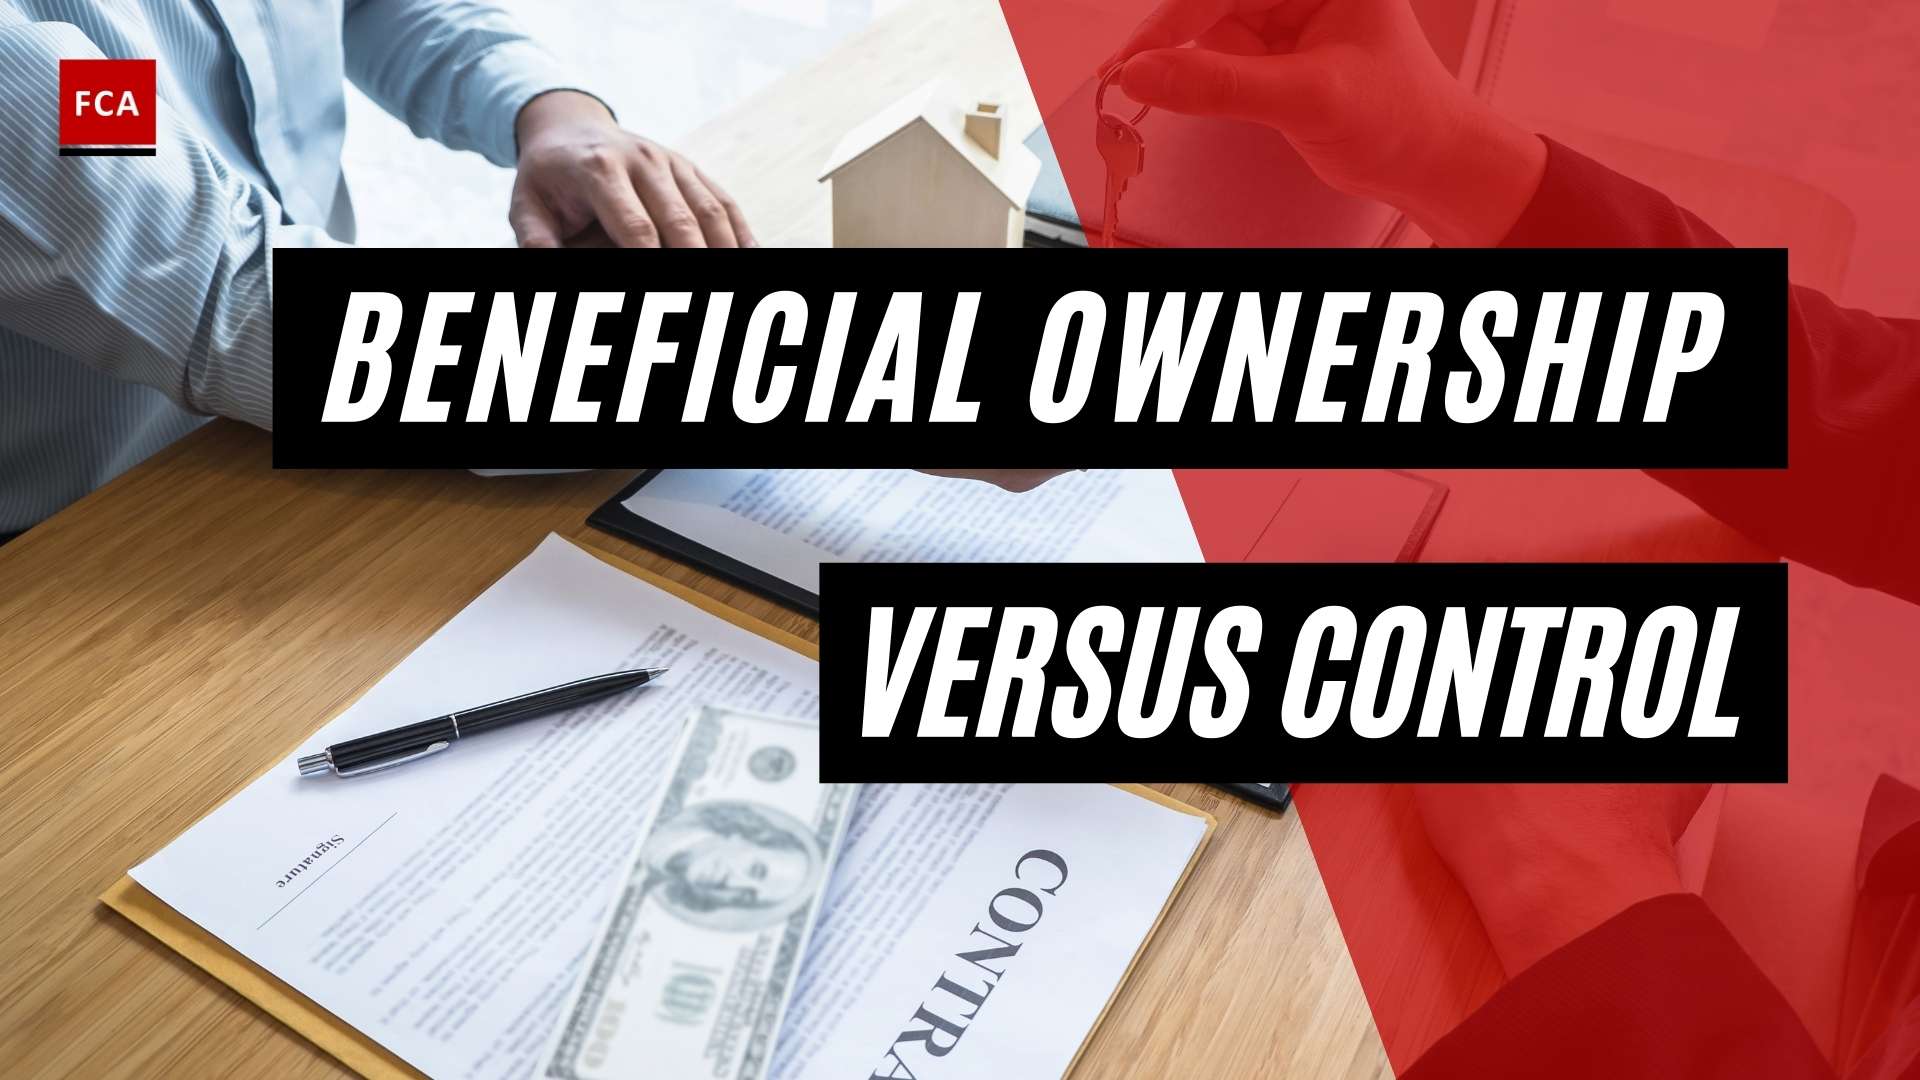 Beneficial Ownership Versus Control - Featured Image